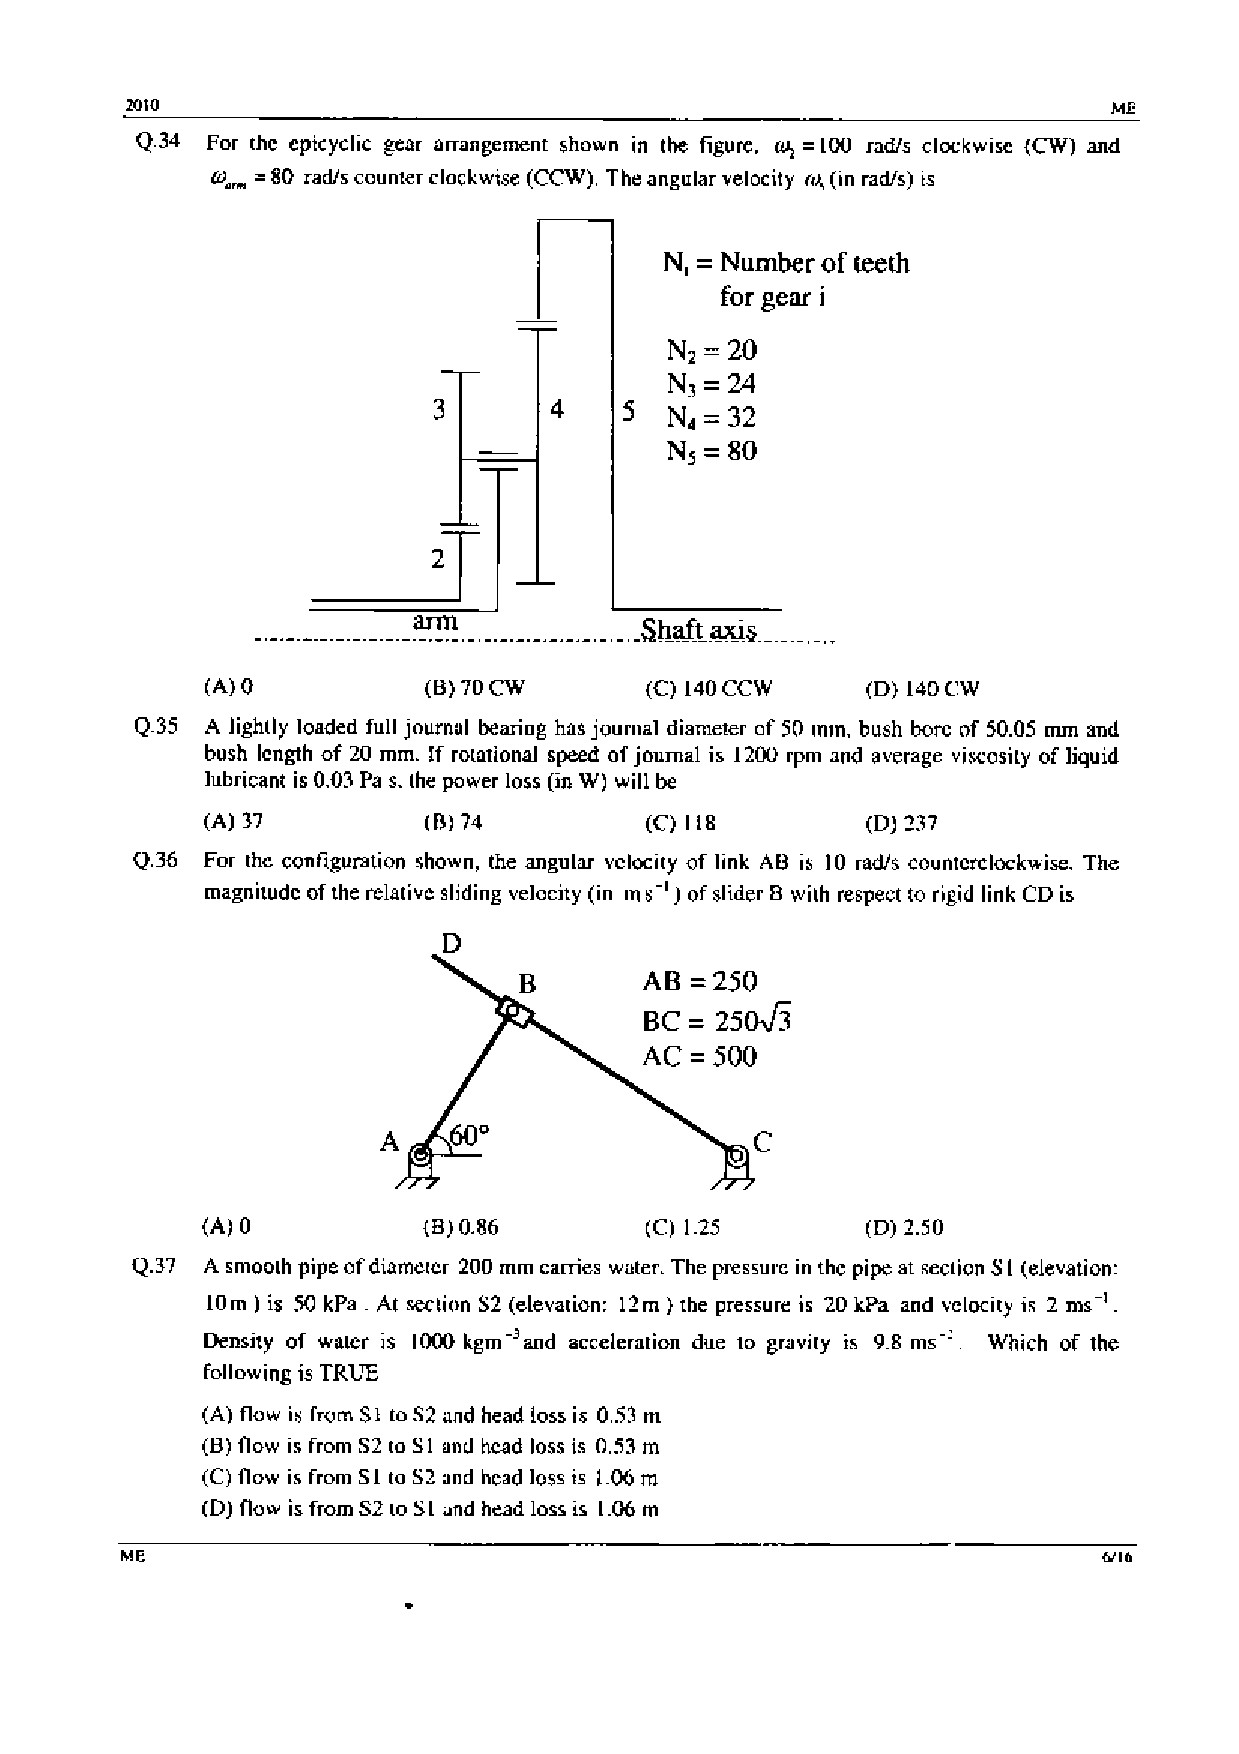 GATE Exam Question Paper 2010 Mechanical Engineering 6